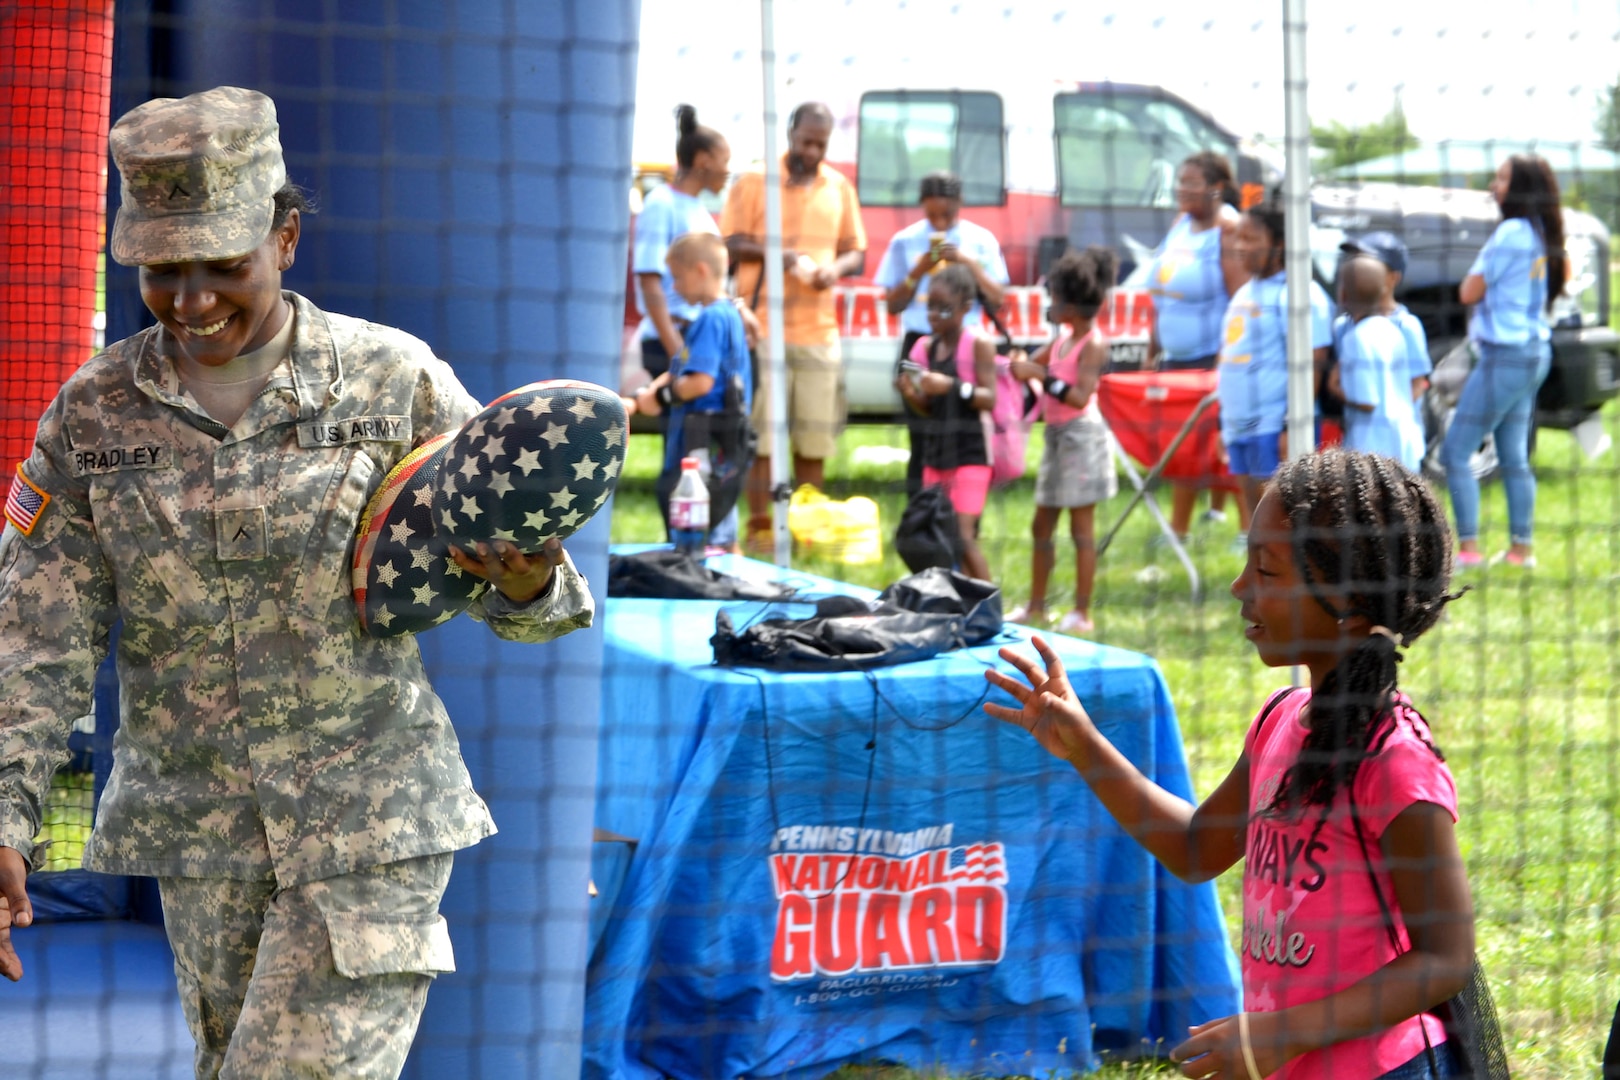 DLA Troop Support active duty personnel were among nearly 40 military personnel to help local children complete seven obstacle courses during the Philly Play Summer Challenge August 10, 2016 in Northeast Philadelphia. More than 2,000 local children participated in the event, aimed at encouraging teamwork and physical fitness.